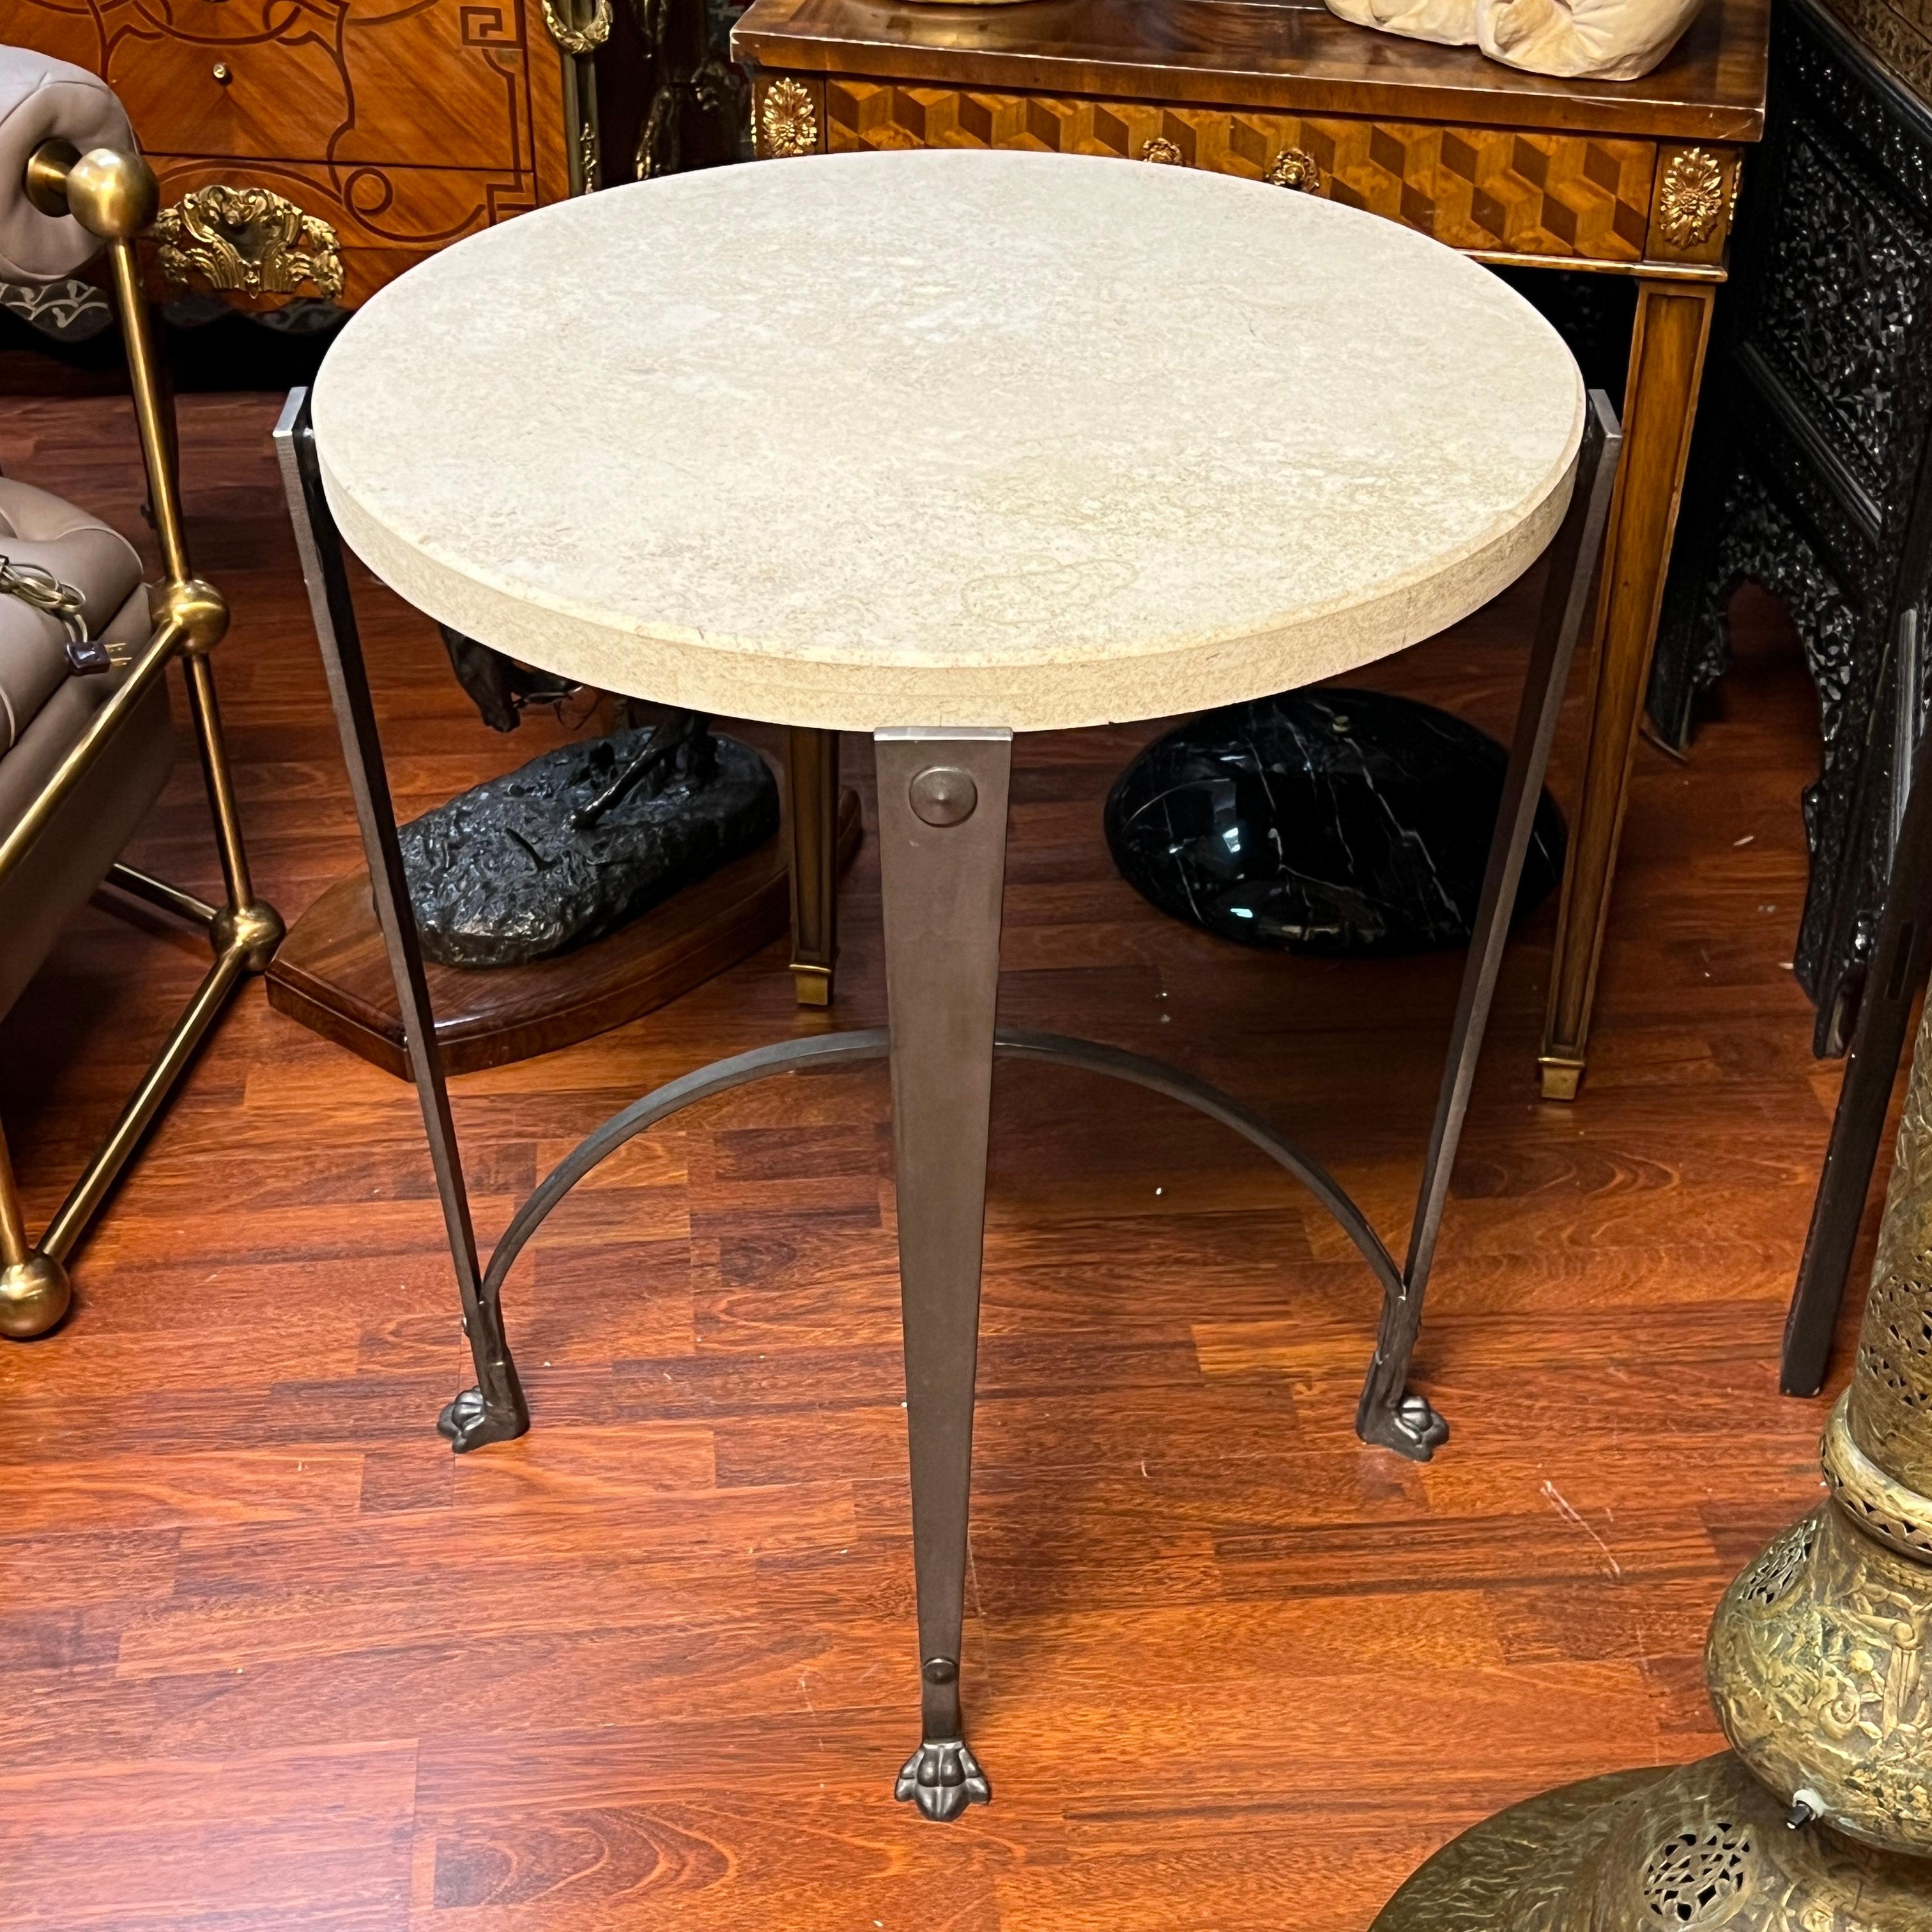 Vintage Neoclassical style  Circular Iron Side Table with Travertine Stone Top.